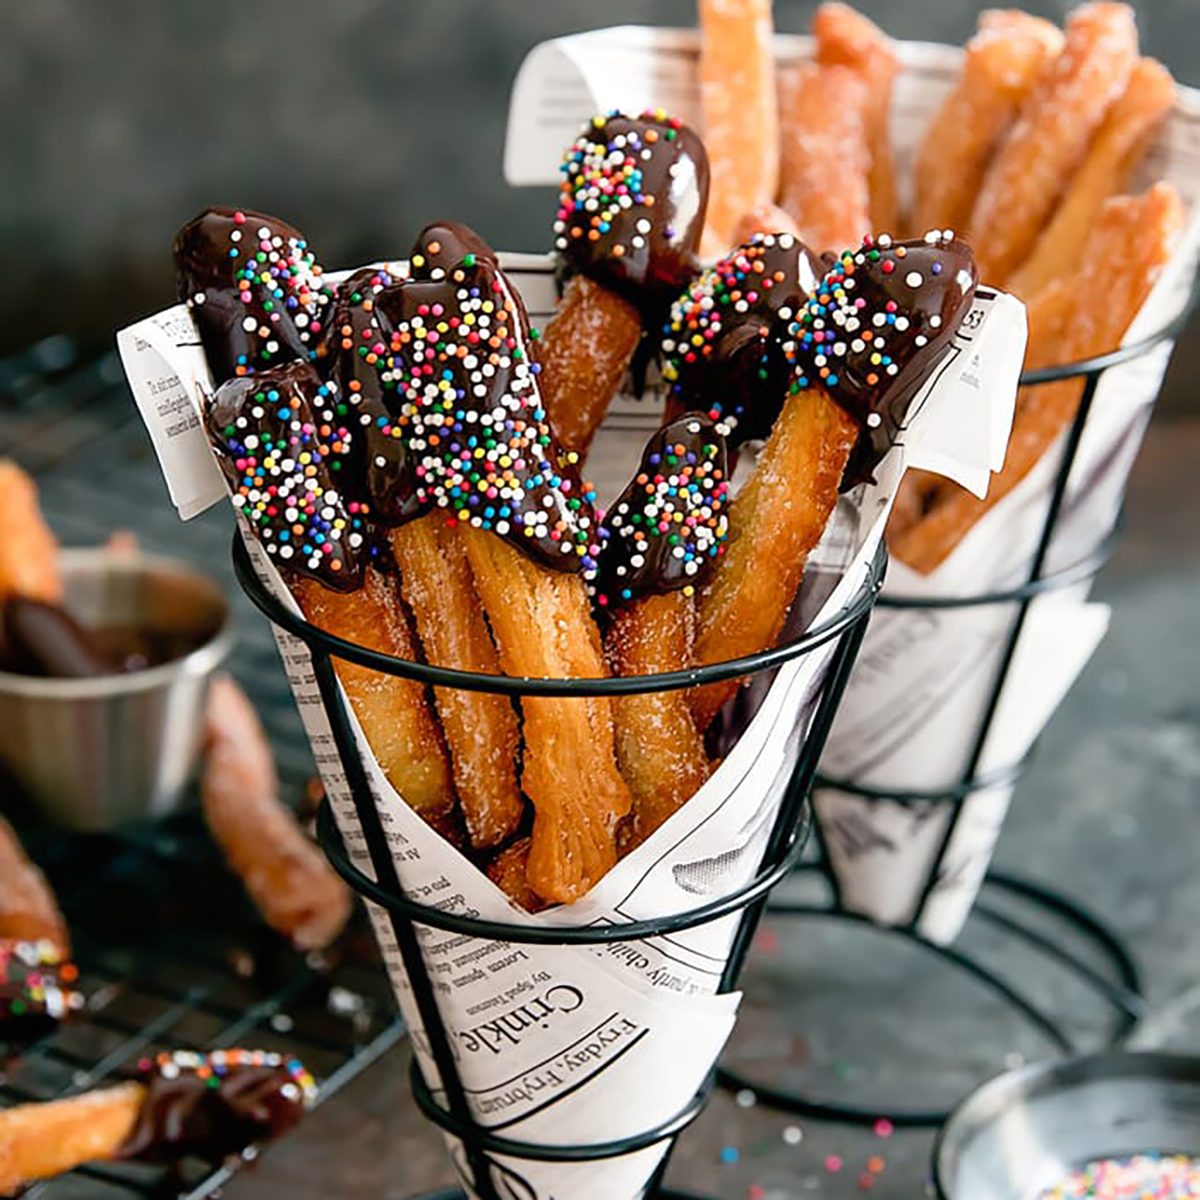 Inspired by: Dunkin' Donuts Donut Fries